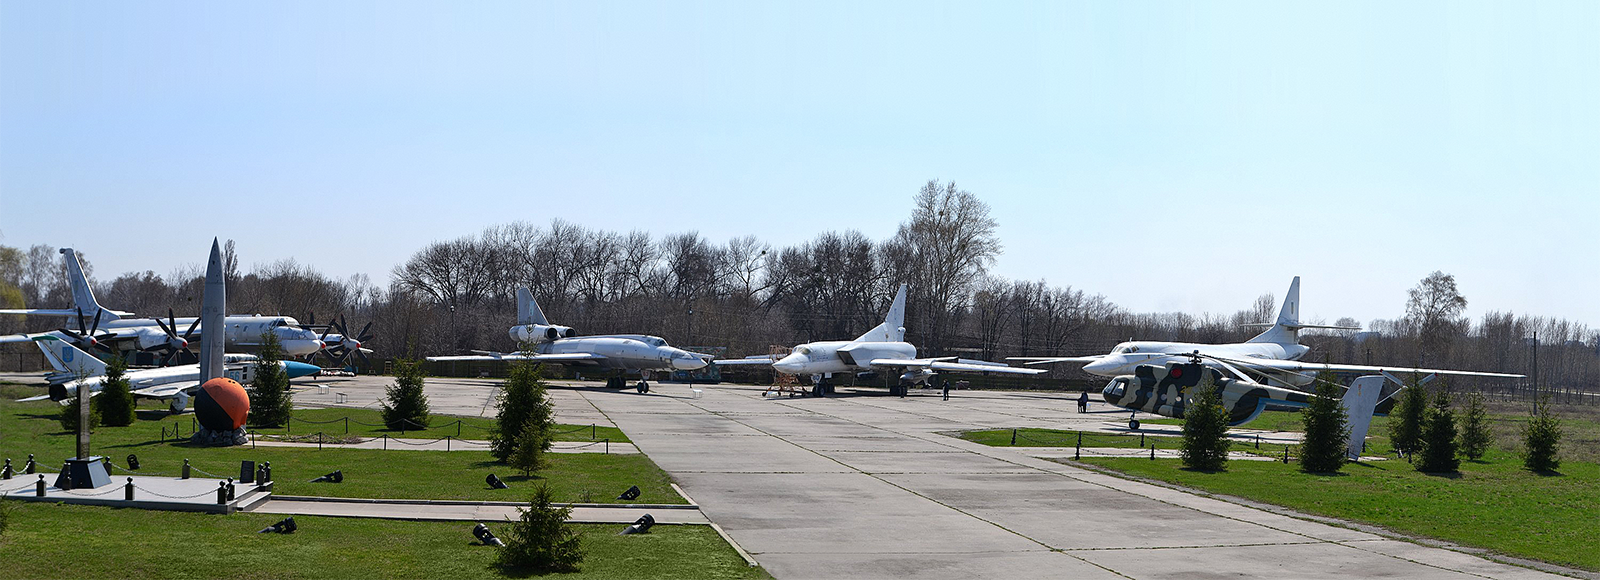 Multiple Russian military bombers and aircraft on display.